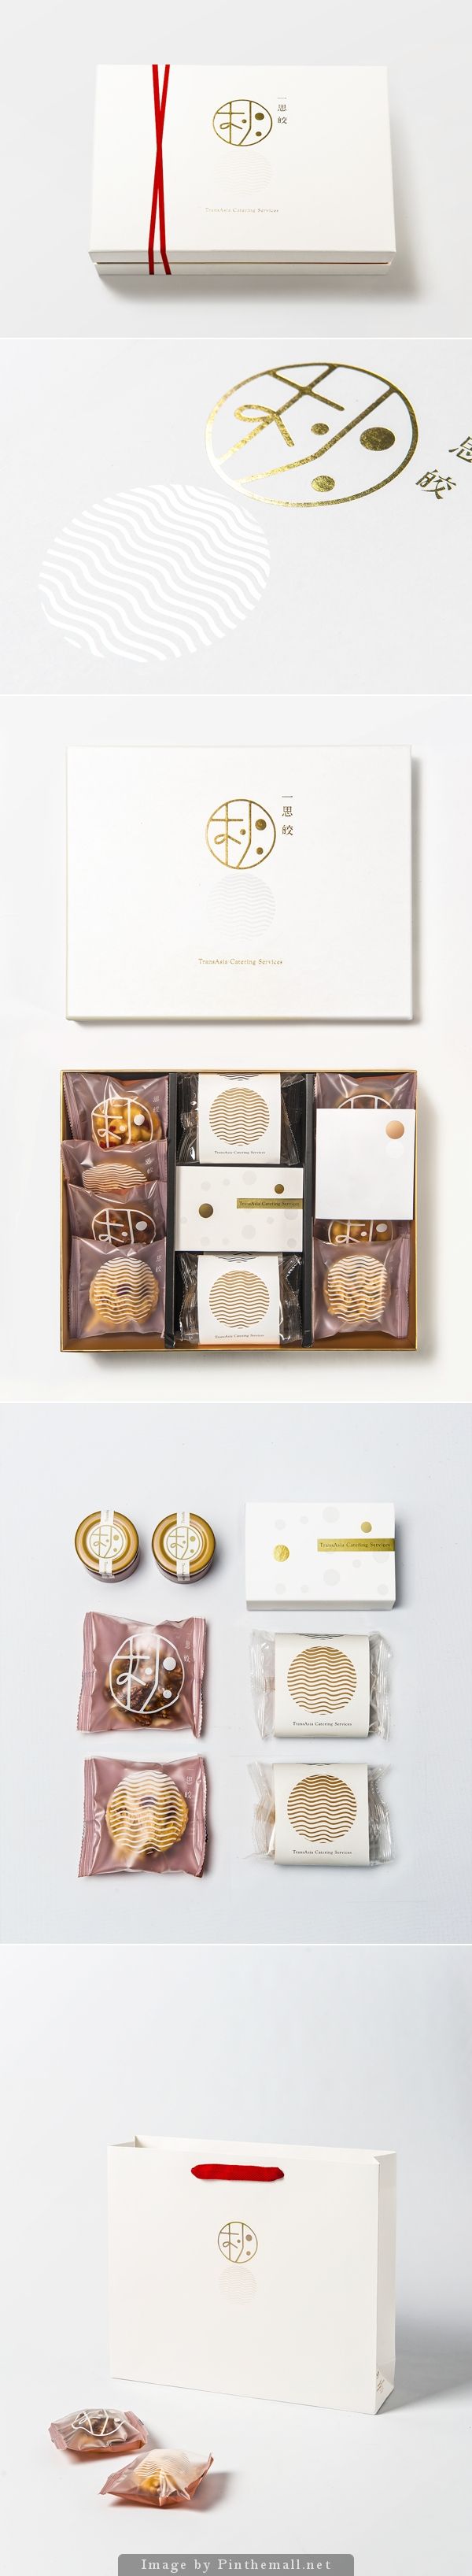 Beautiful packaging for TransAsia’s Mid-autumn festival gifts curated by Packa...